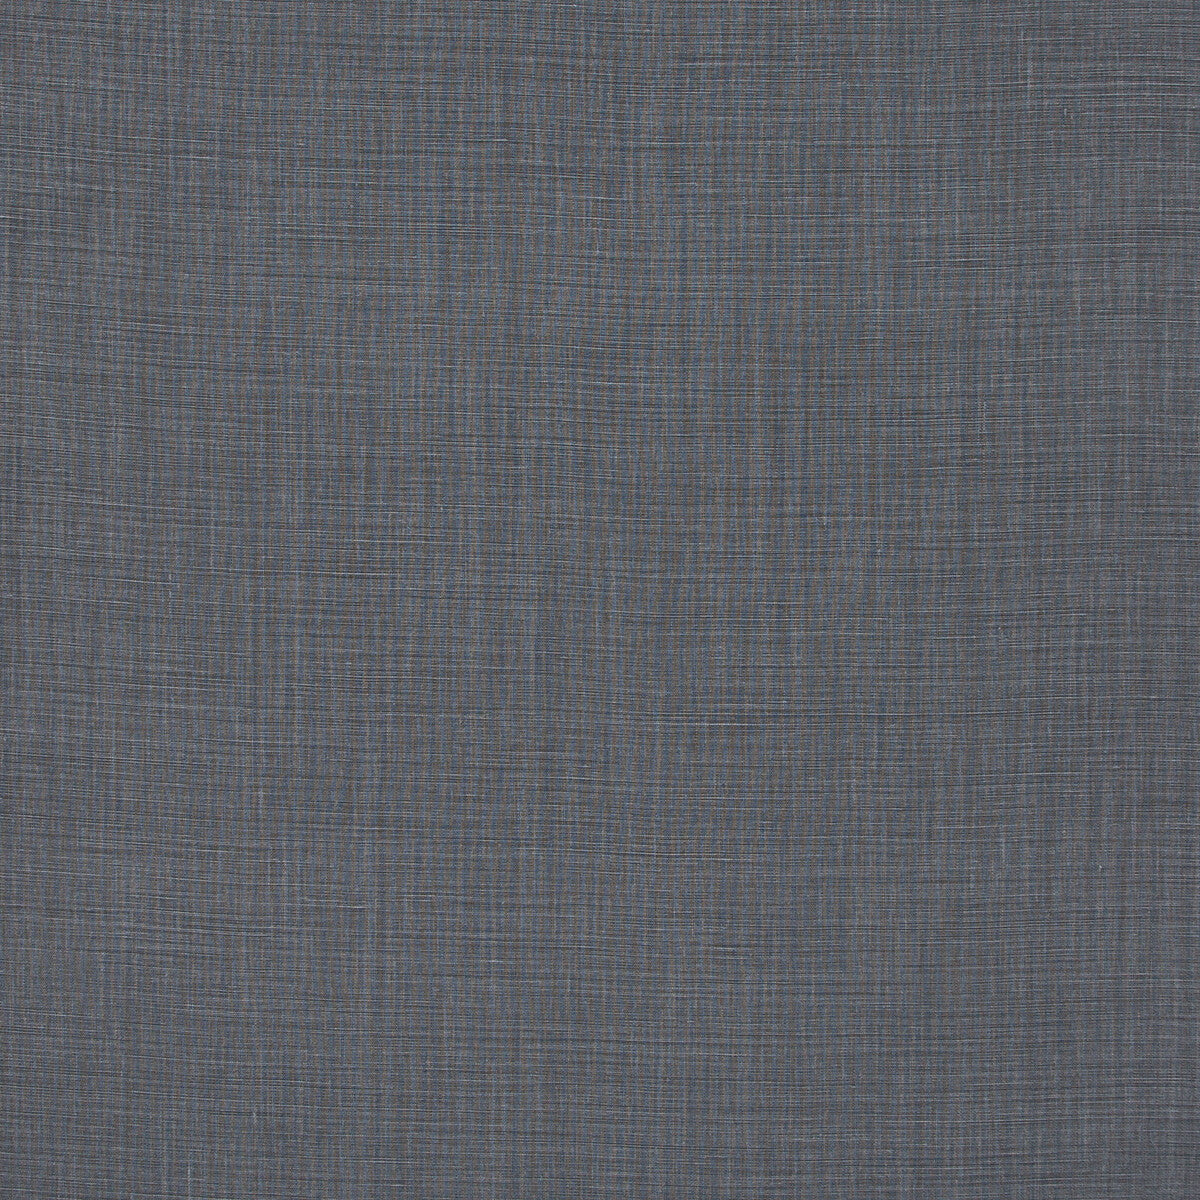 Baker House Linen fabric in charcoal color - pattern BF10961.985.0 - by G P &amp; J Baker in the Baker House Linens collection